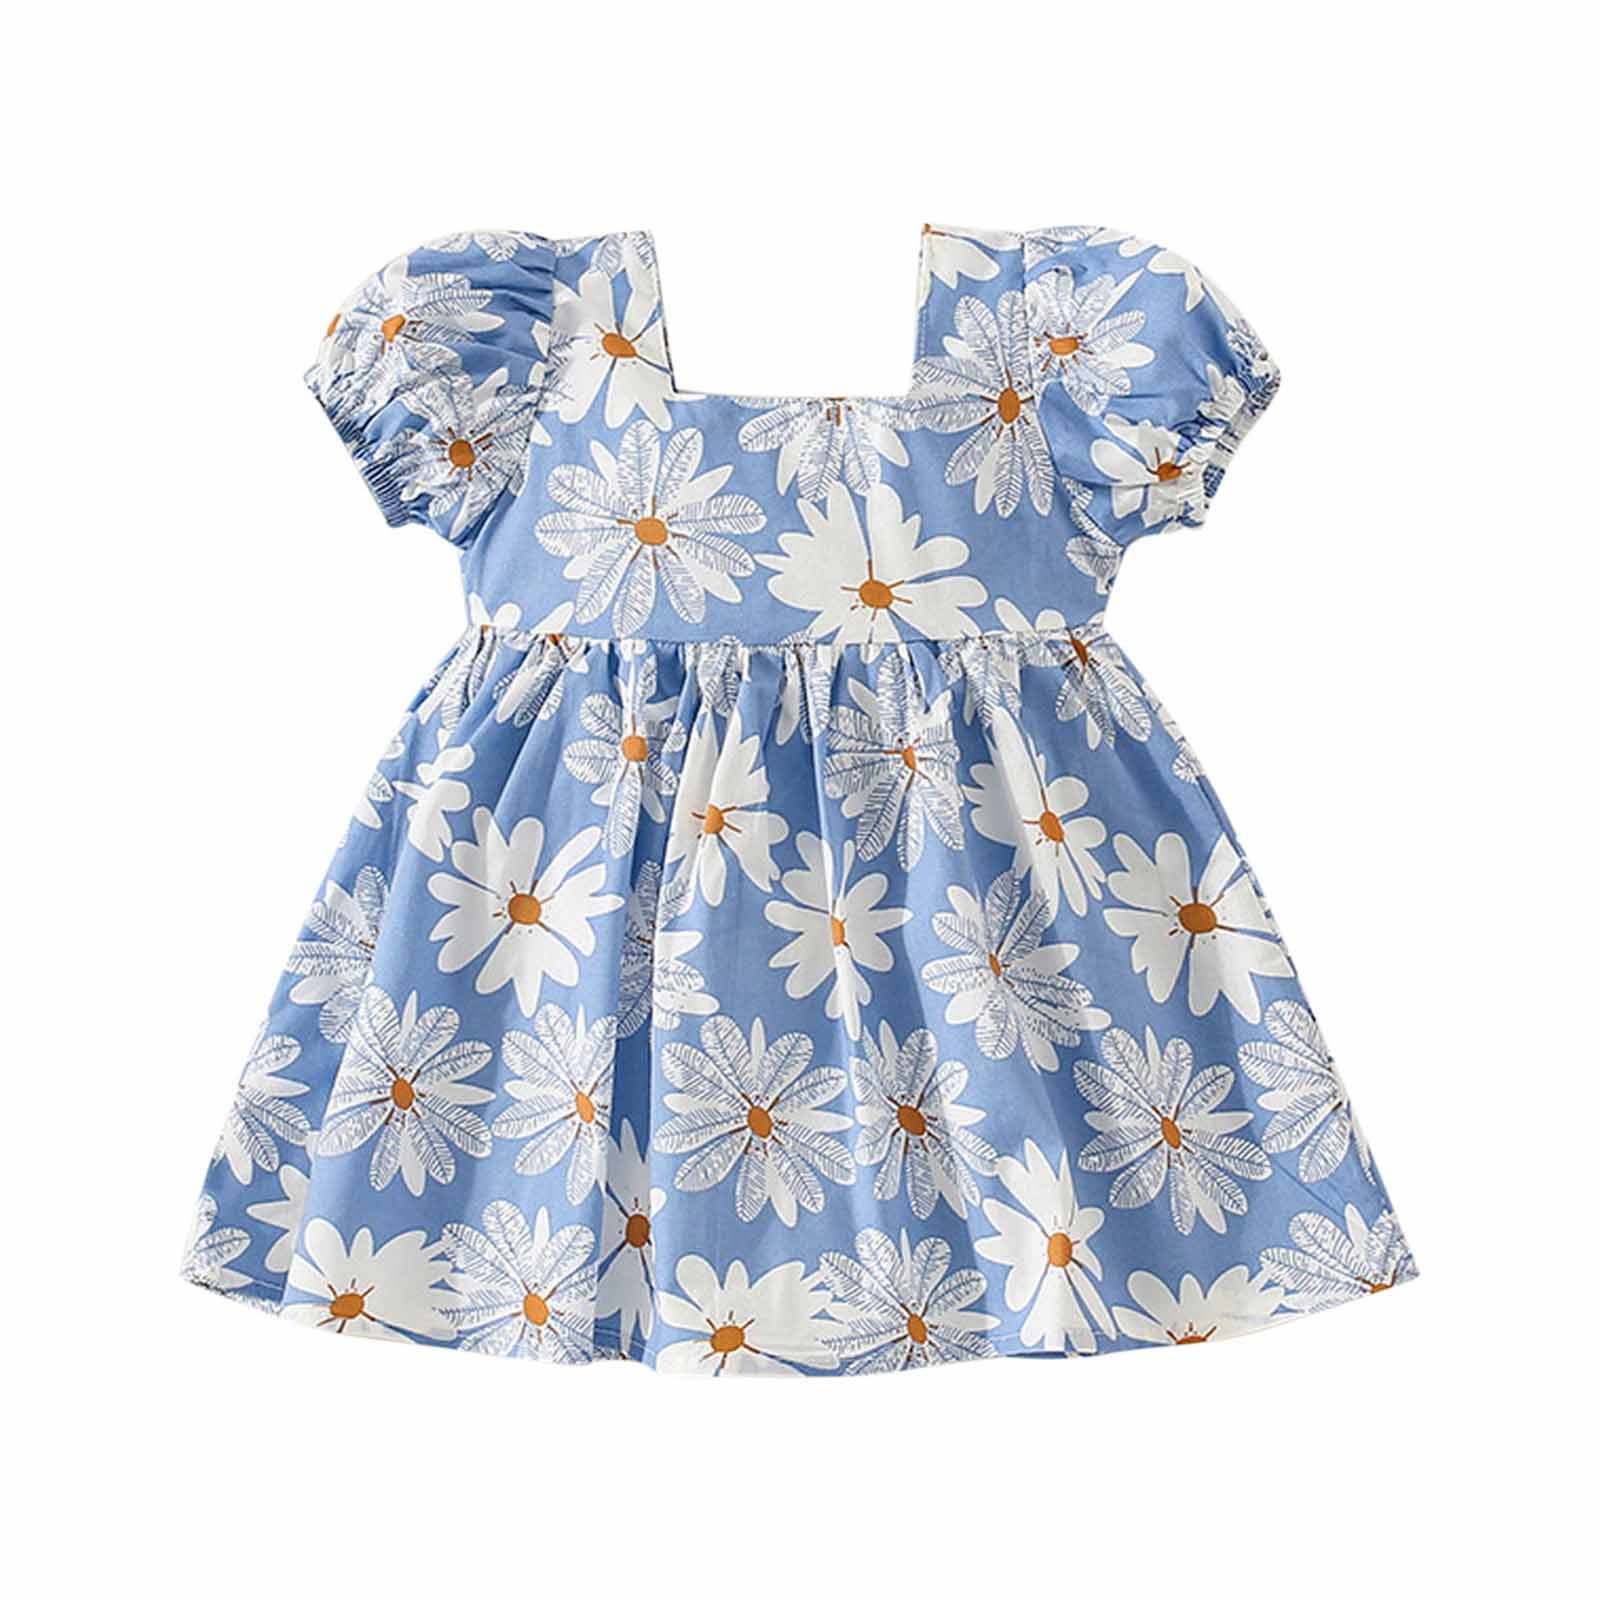 22 cute baby clothes fit for a royal ceremony | Emma's Diary